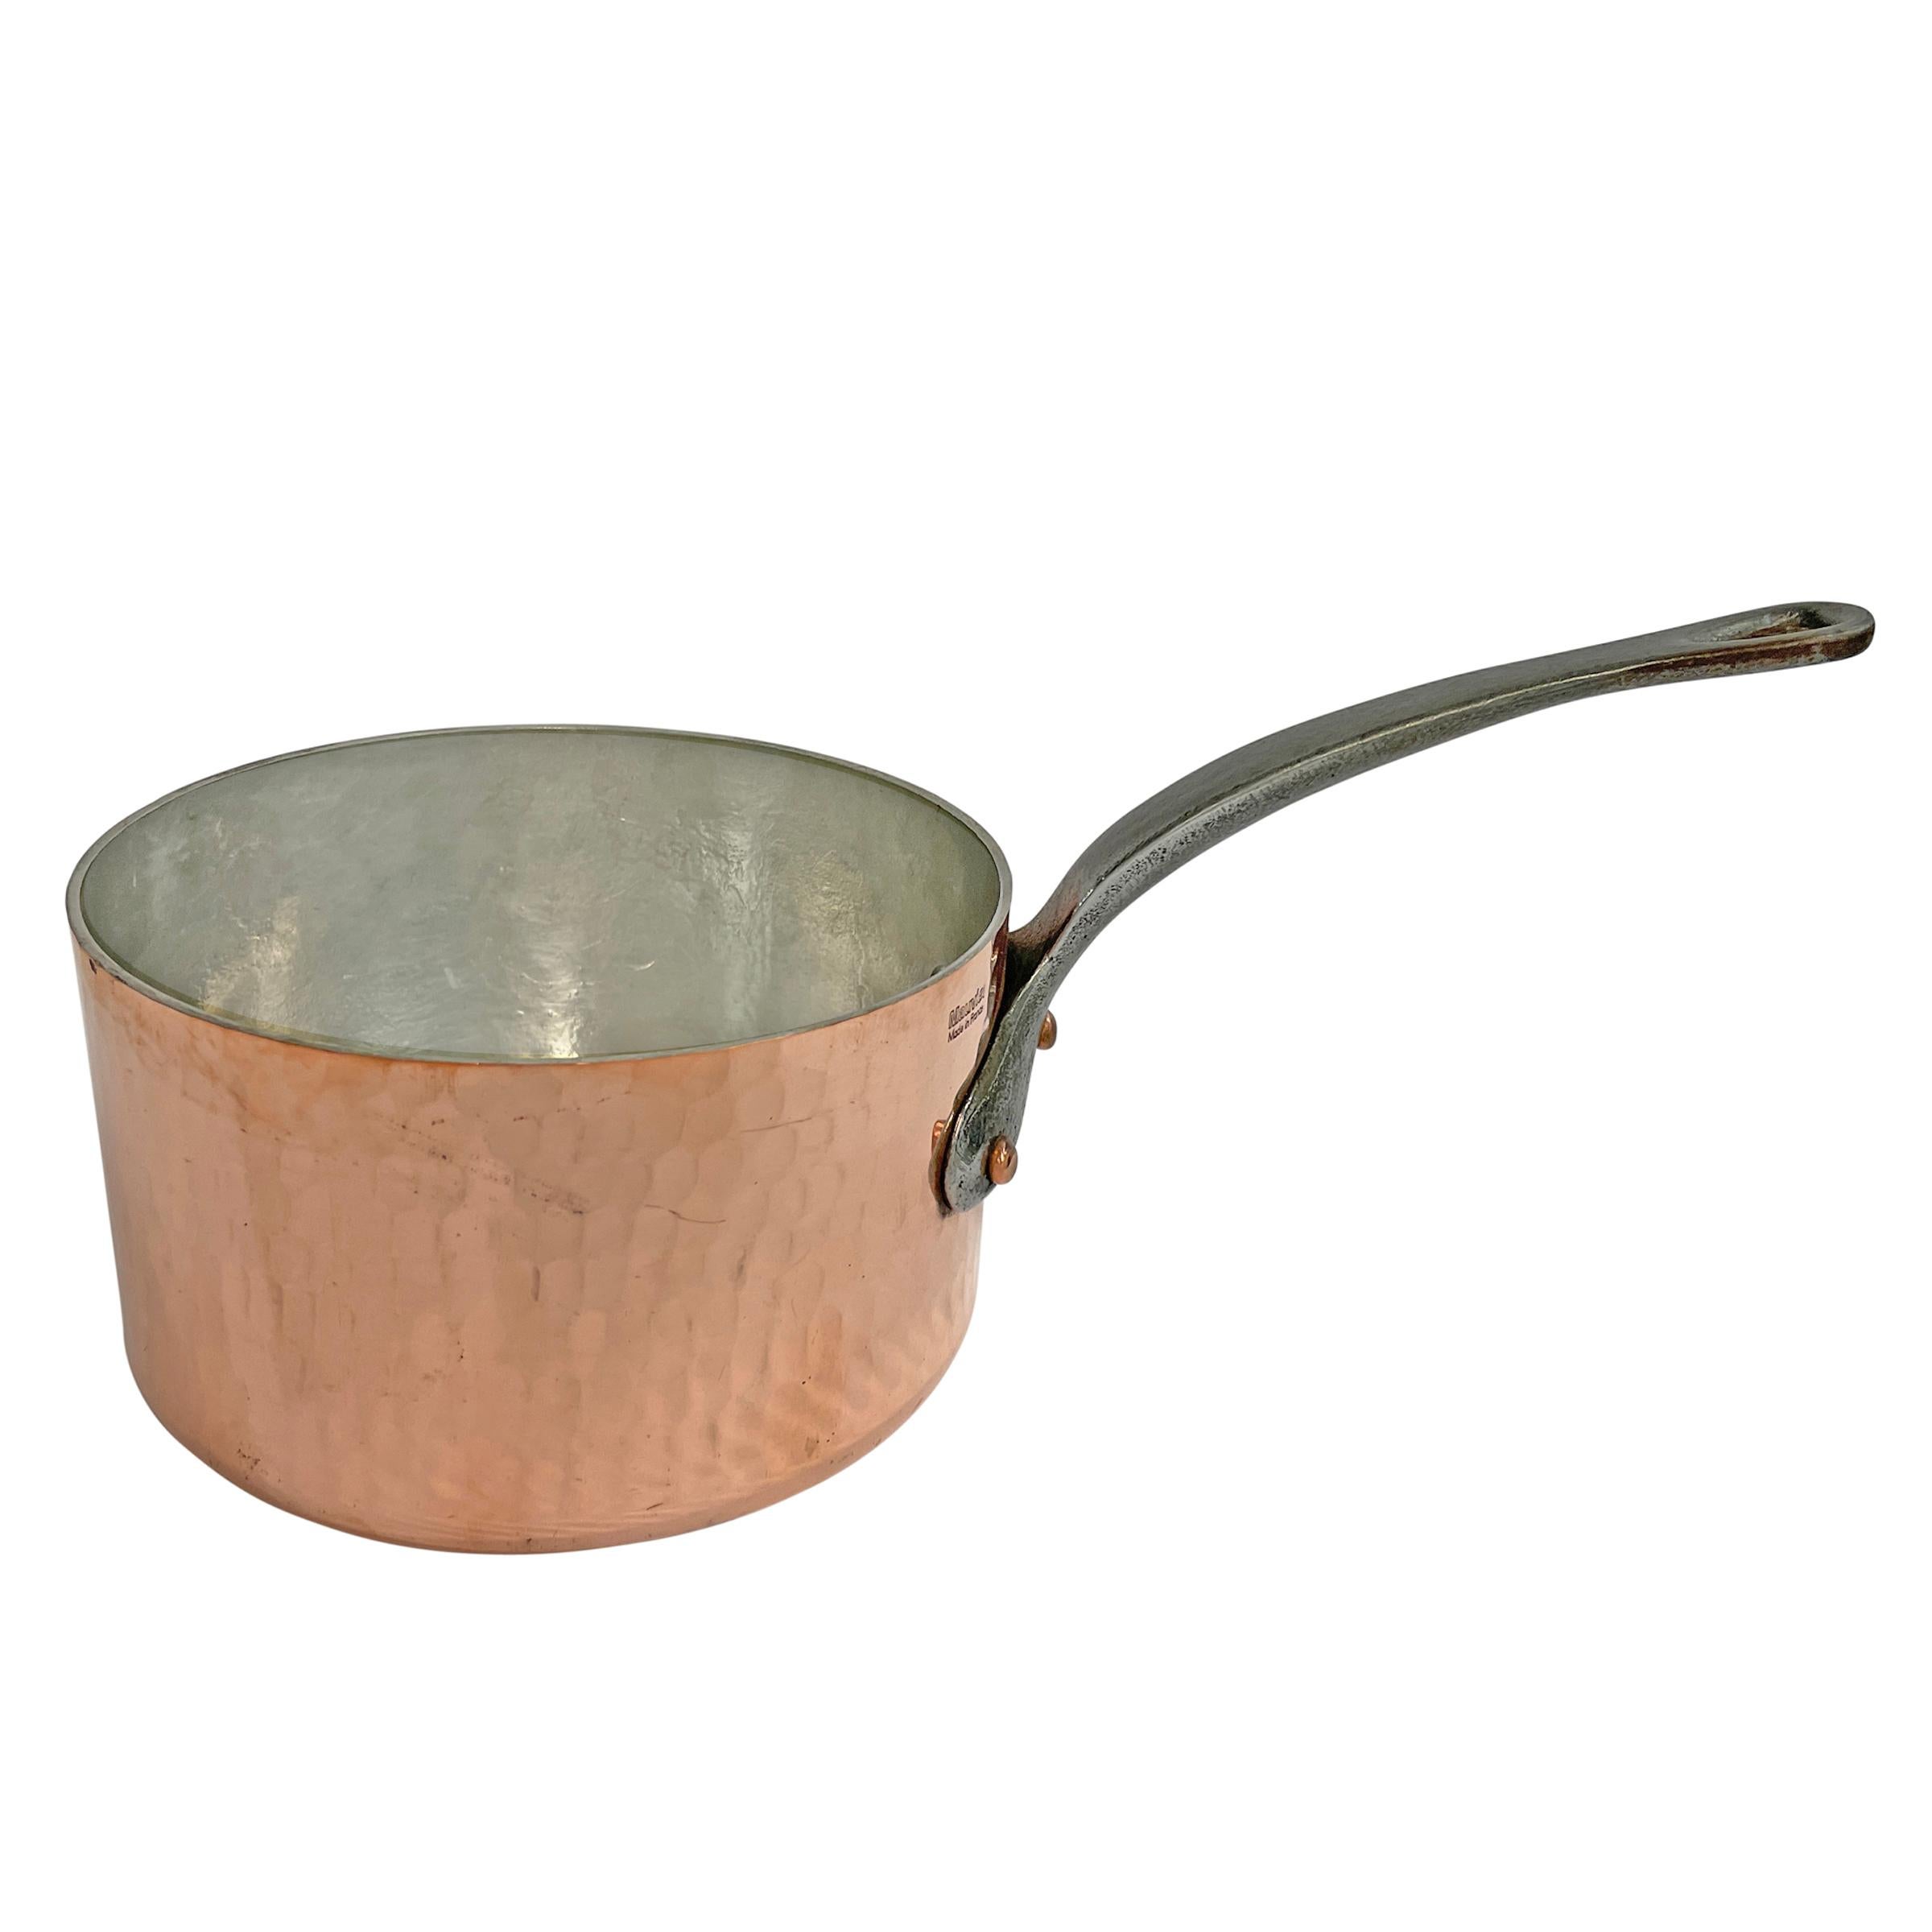 Contemporary Set of French Mauviel Hammered Copper Saucepans